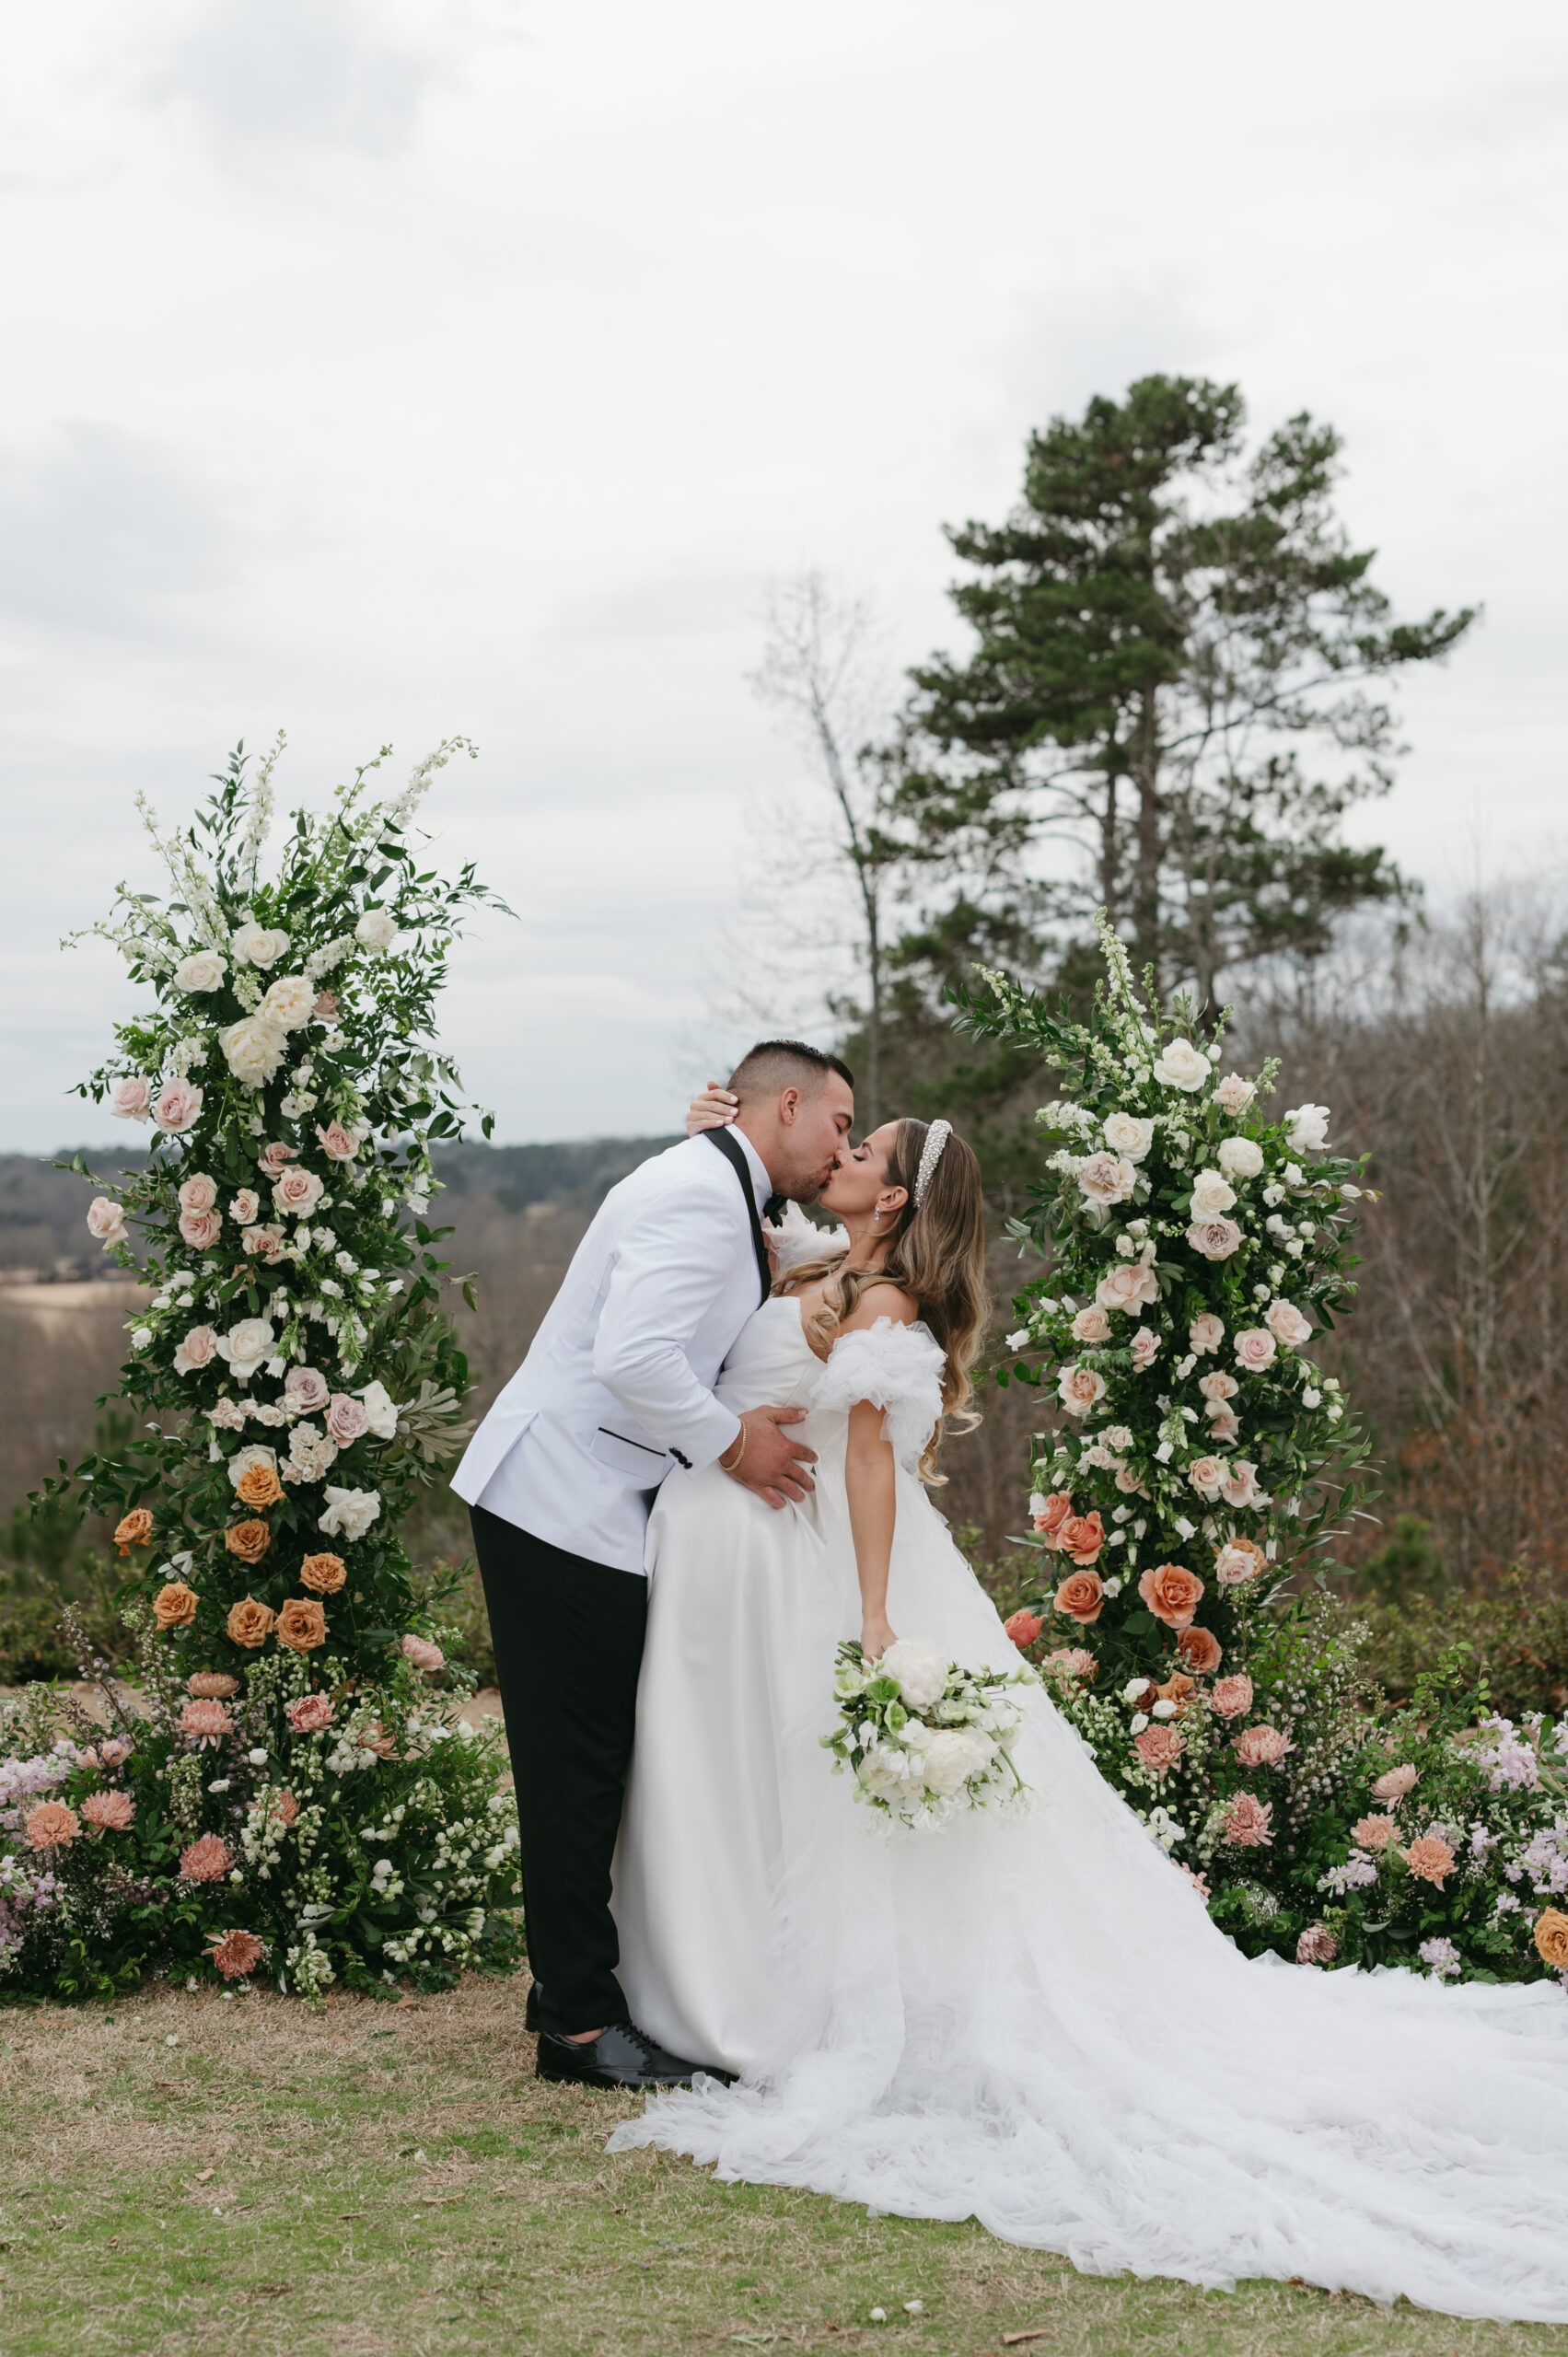 Modern wedding portraits with a bride with a bridal headband and groom with a white suit in front of their colorful floral arch. | Megan Kuhn Photography